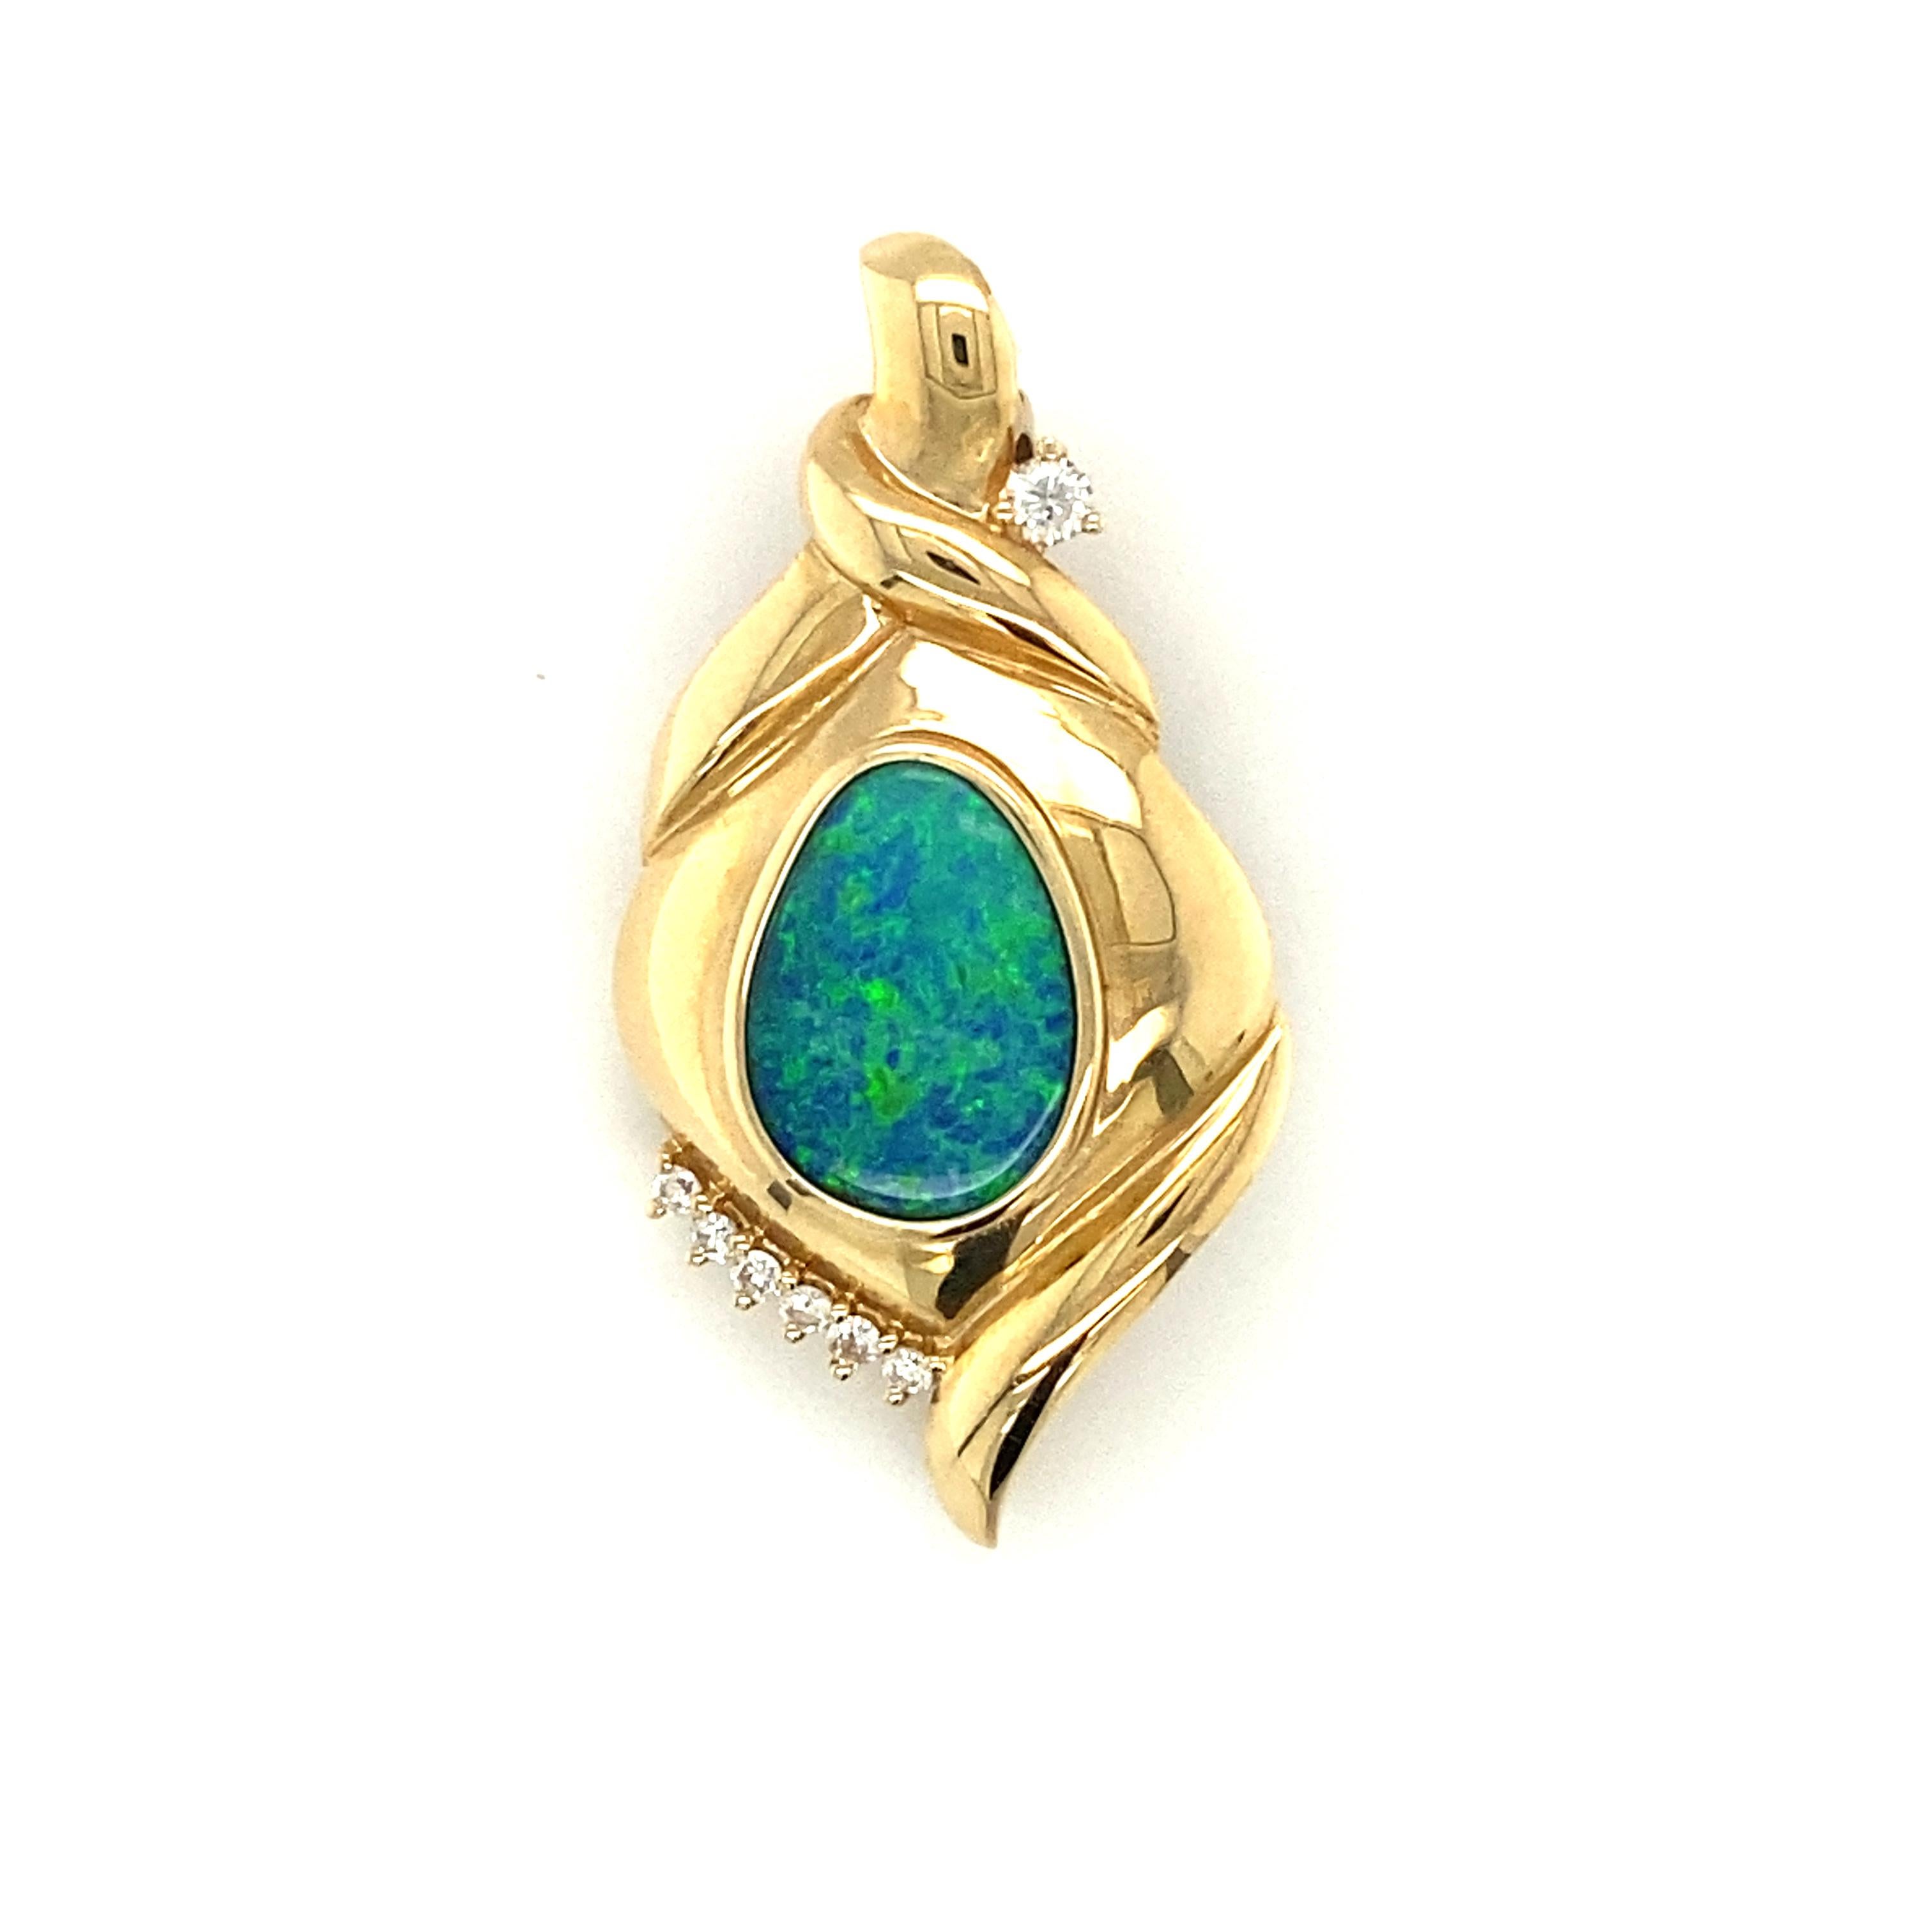 Item Details: This freeform design pendant made by artist Frank Lau features a center Australian Opal of 2.44 carats, with round accent diamonds. This is signed by the artist.

Circa: 2000s
Metal Type: 14k yellow gold
Weight: 7.4 grams
Size: 1.5